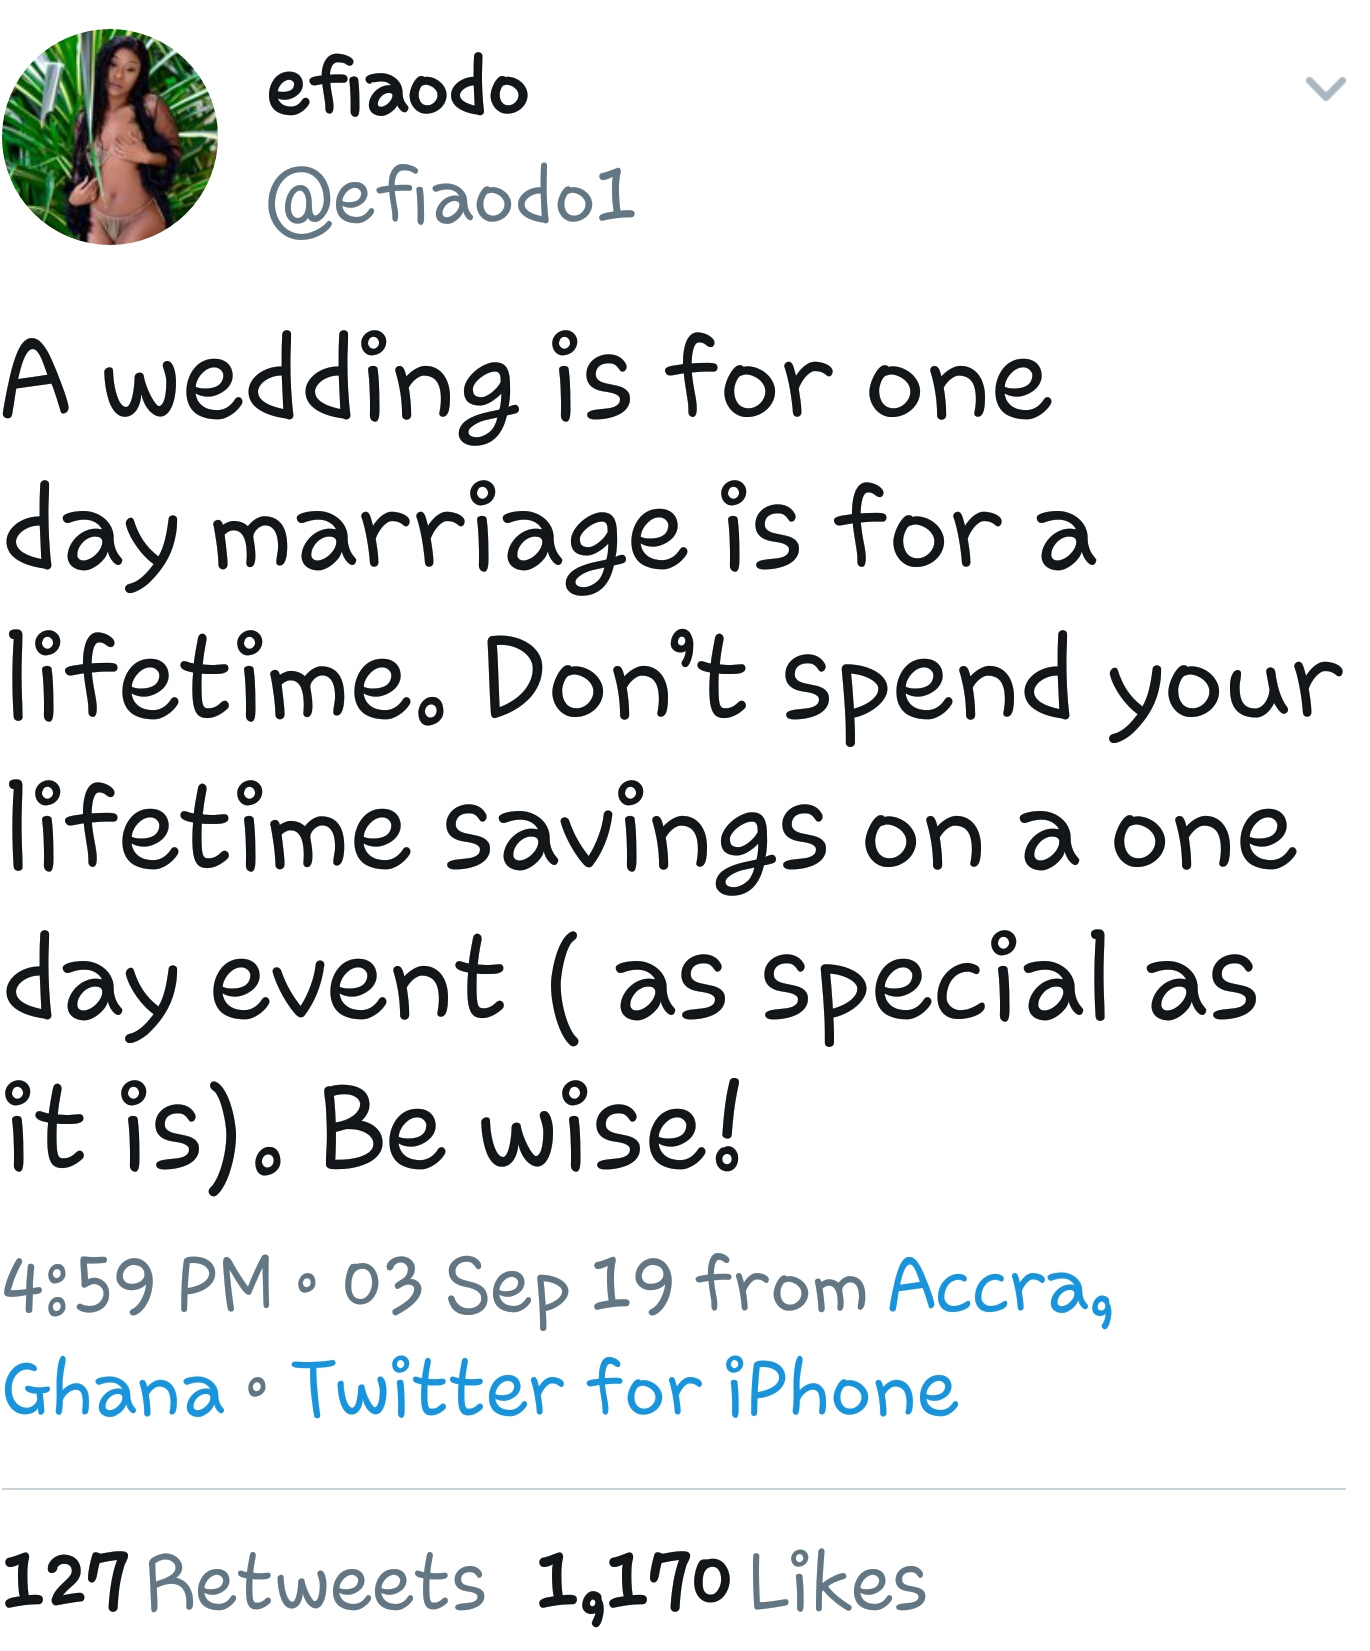 Don't spend all your life time savings on one event- Efia Odo advices would be couples